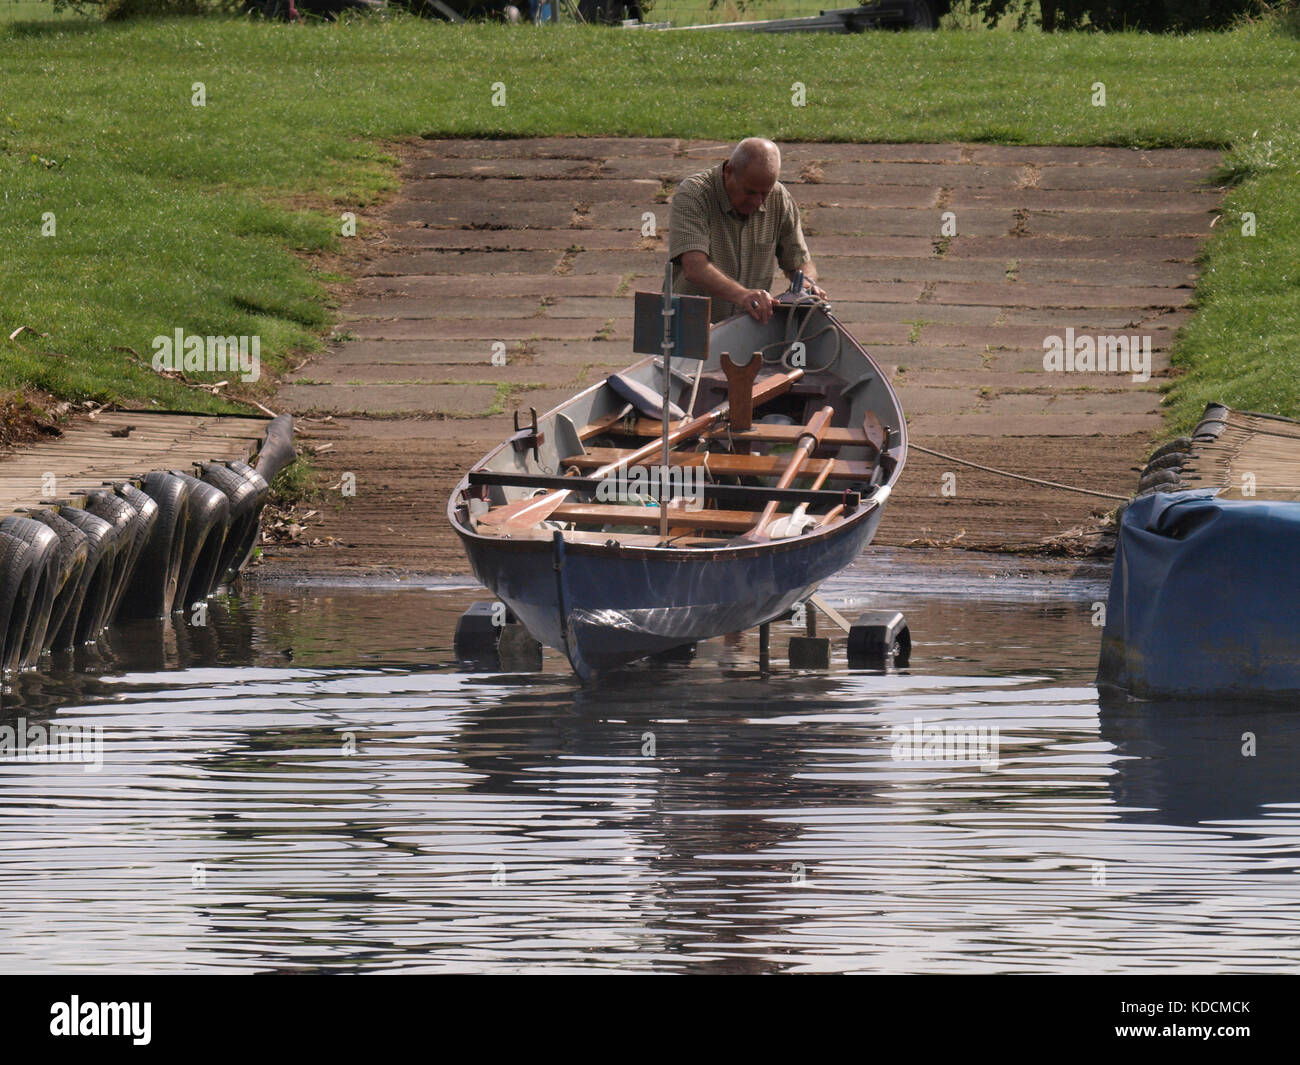 Man Launching a rowing boat on a trailer from slipway, Tewkesbury, Gloucestershire, UK Stock Photo